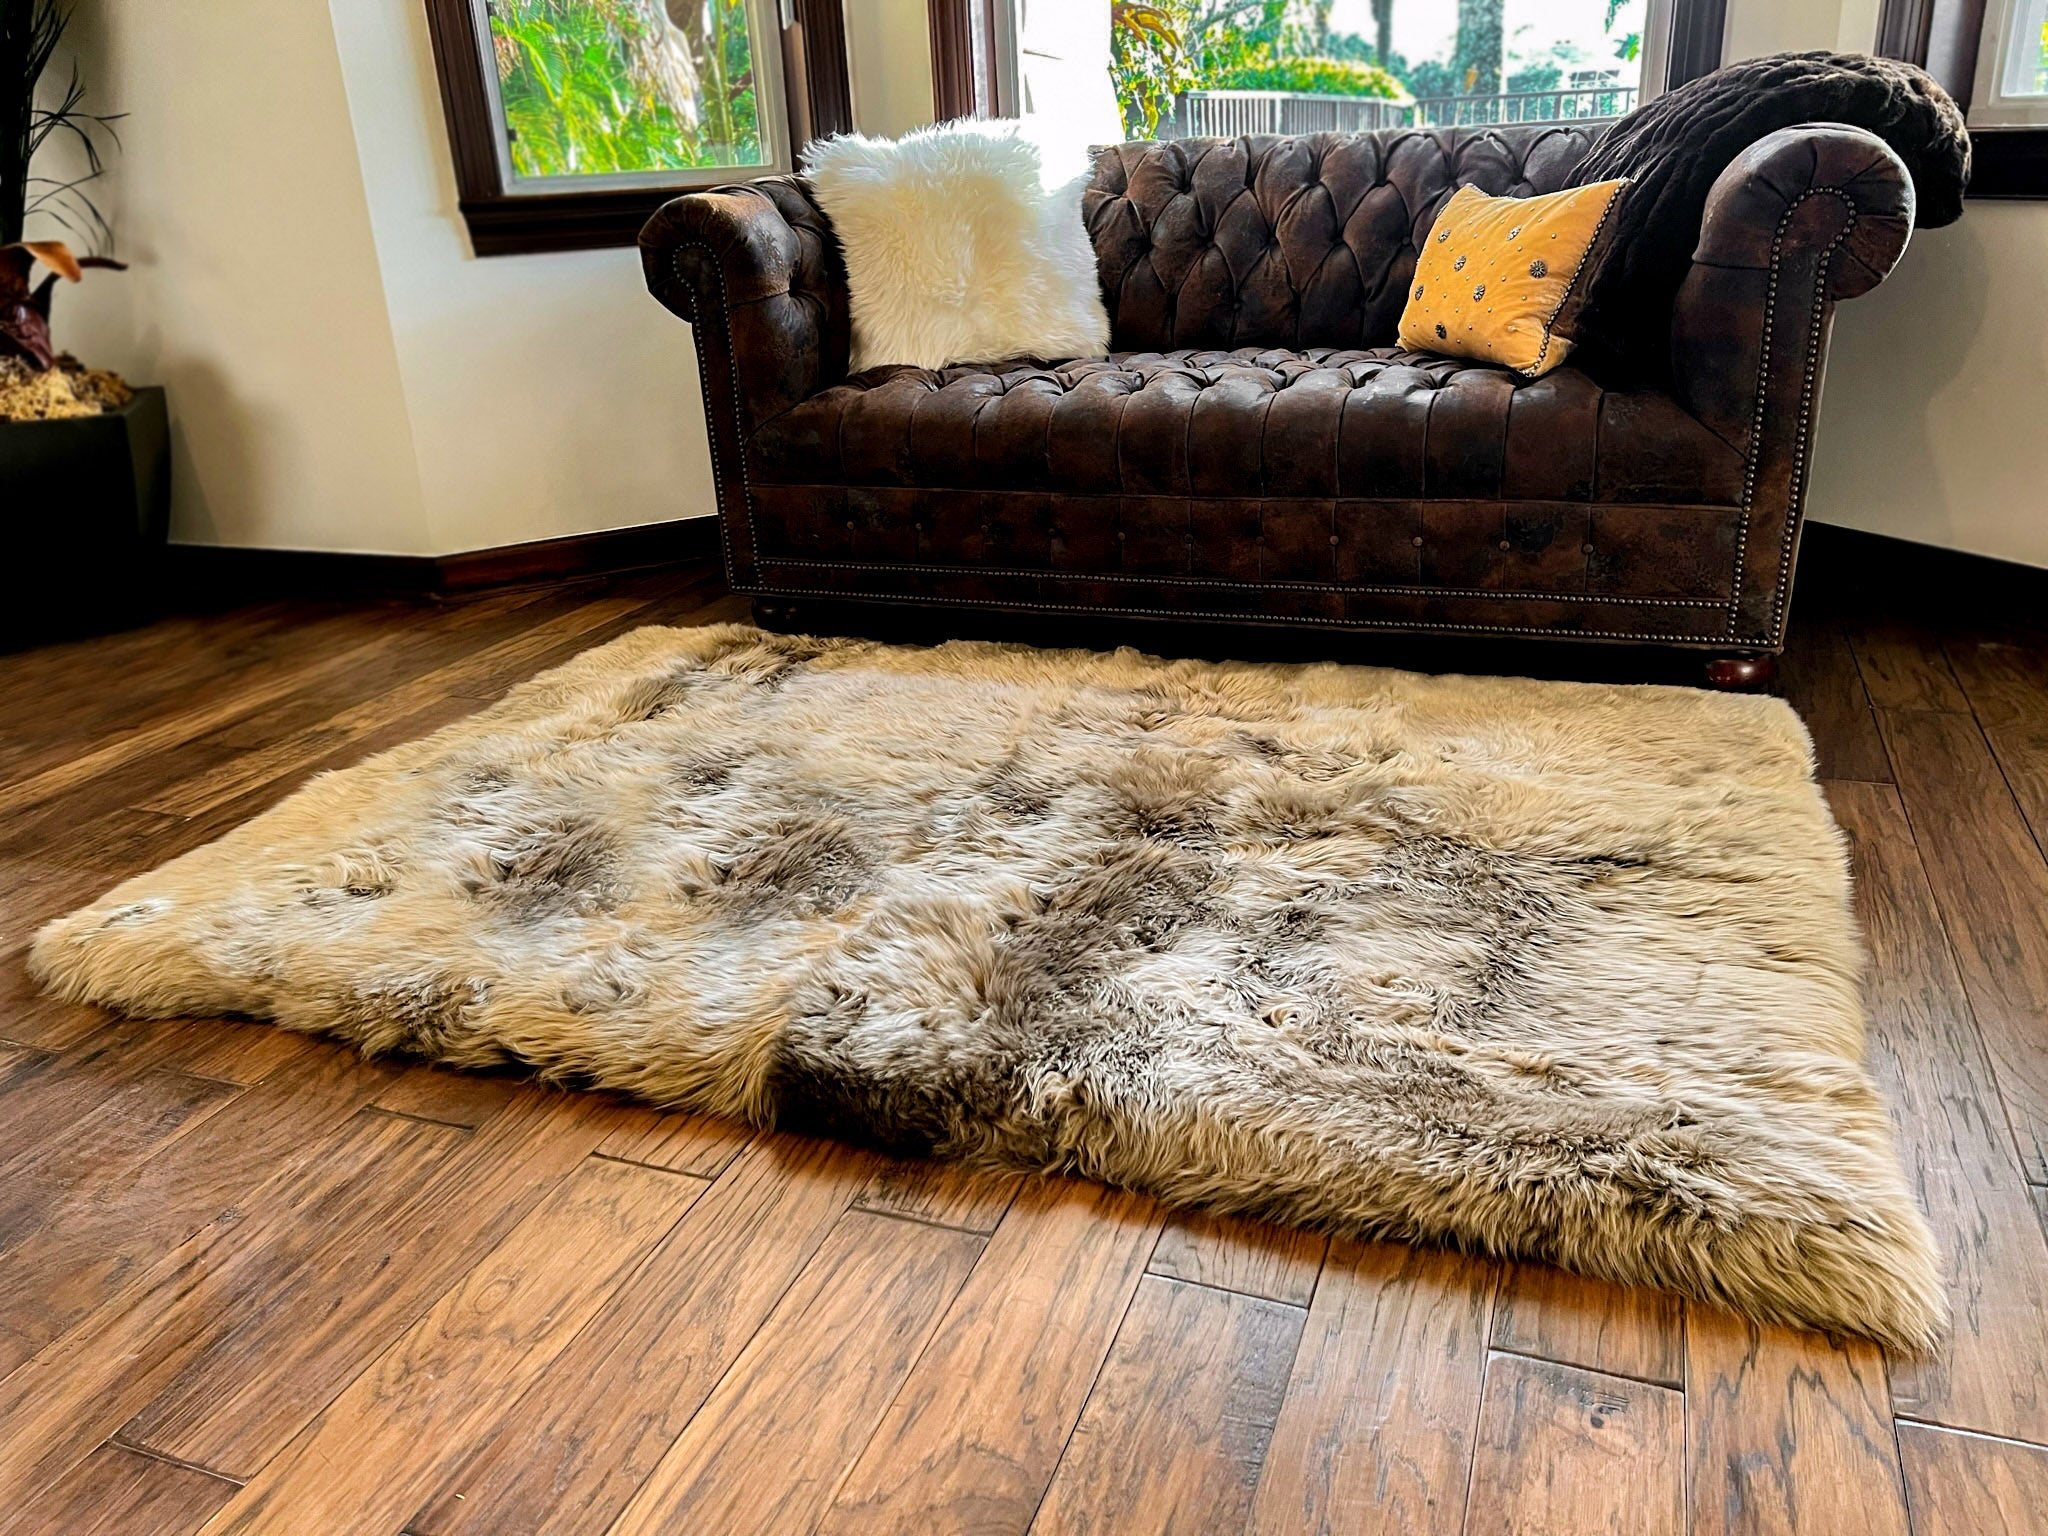 Taupe New Zealand Sheepskin Area Rug 4' x 6' by Hudson Hides